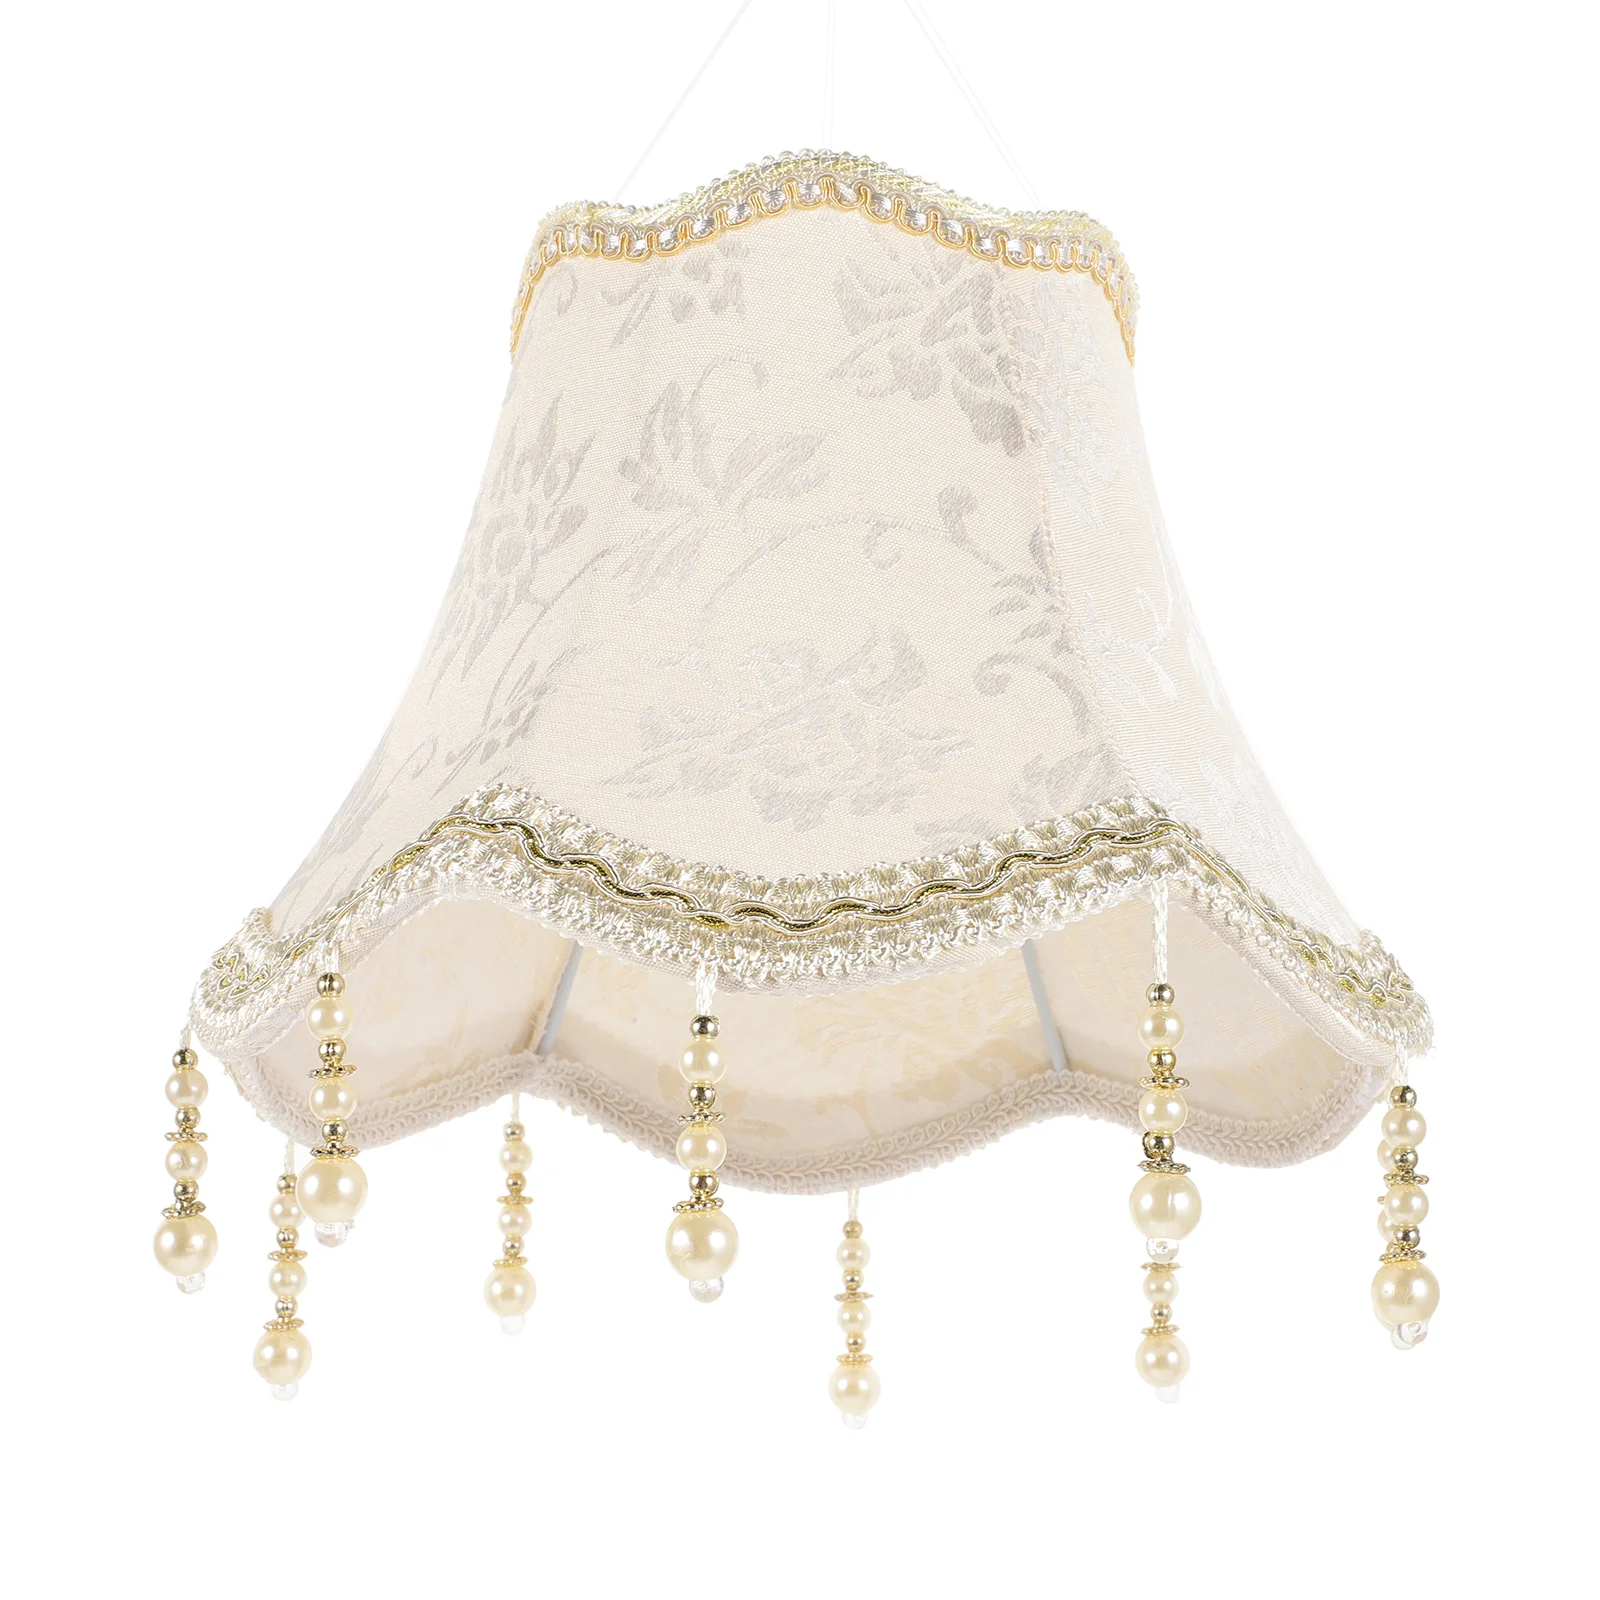 

Jacquard Lampshade Replacement Cover Shades Desk Fabric Chandelier Bell Shaped Light Metal Decorative Cloth Macrame Beads